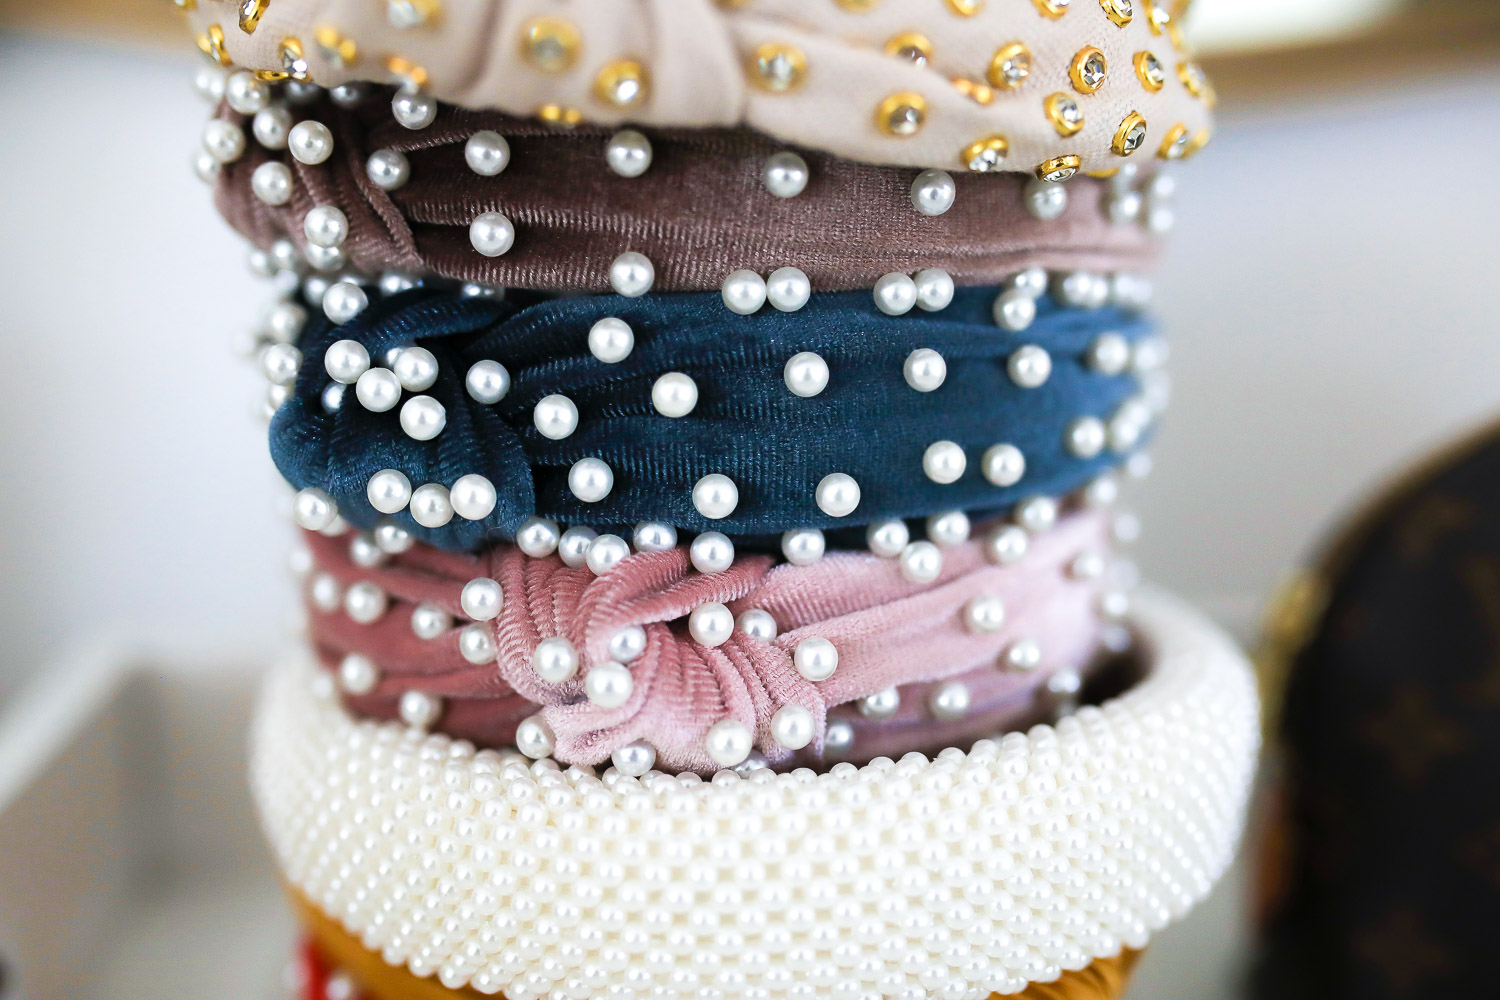 pearl velvet headband, swig marble cup insulated, top amazon must haves, amazon best buys 2020, emily gemma, amazon prime must haves blog post,_-4 | Amazon Prime Favorites by popular US life and style blog, The Sweetest Thing: image of Amazon Prime pearl headbands. 